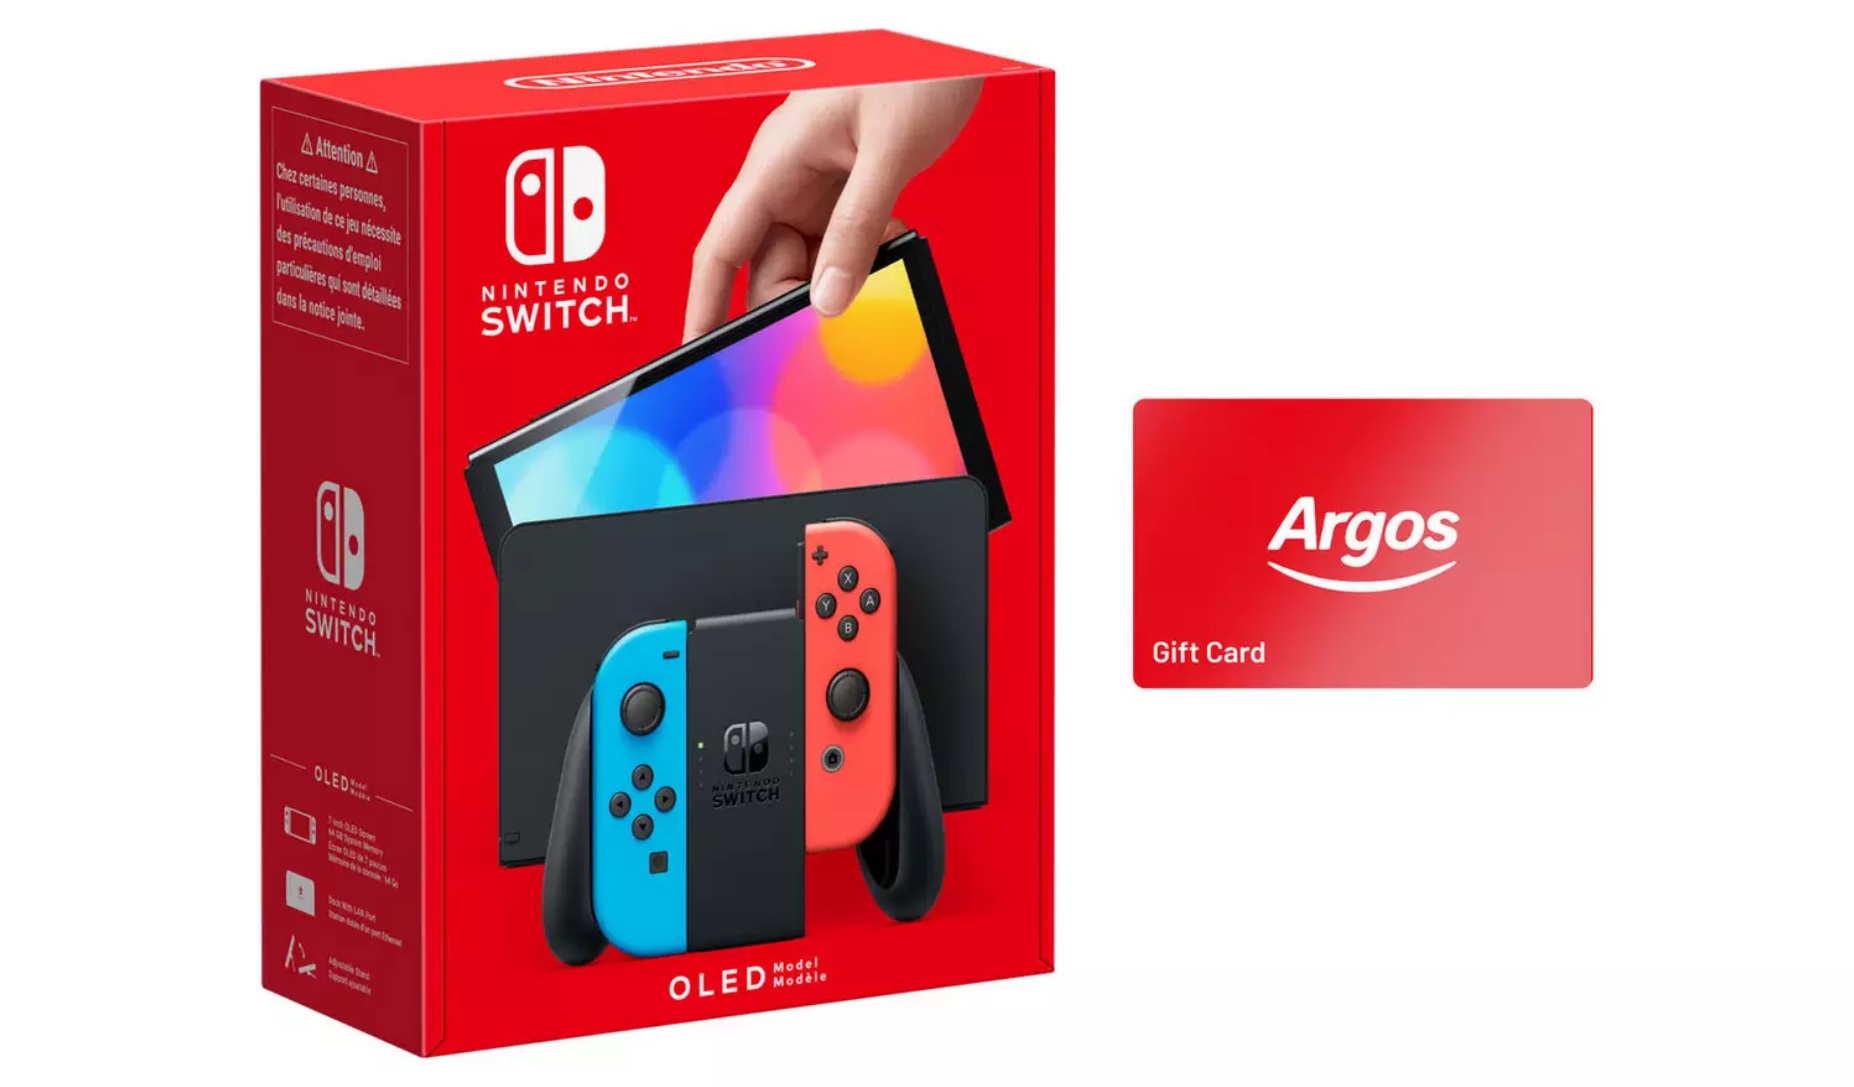 Nintendo Switch OLED with free Argos gift card